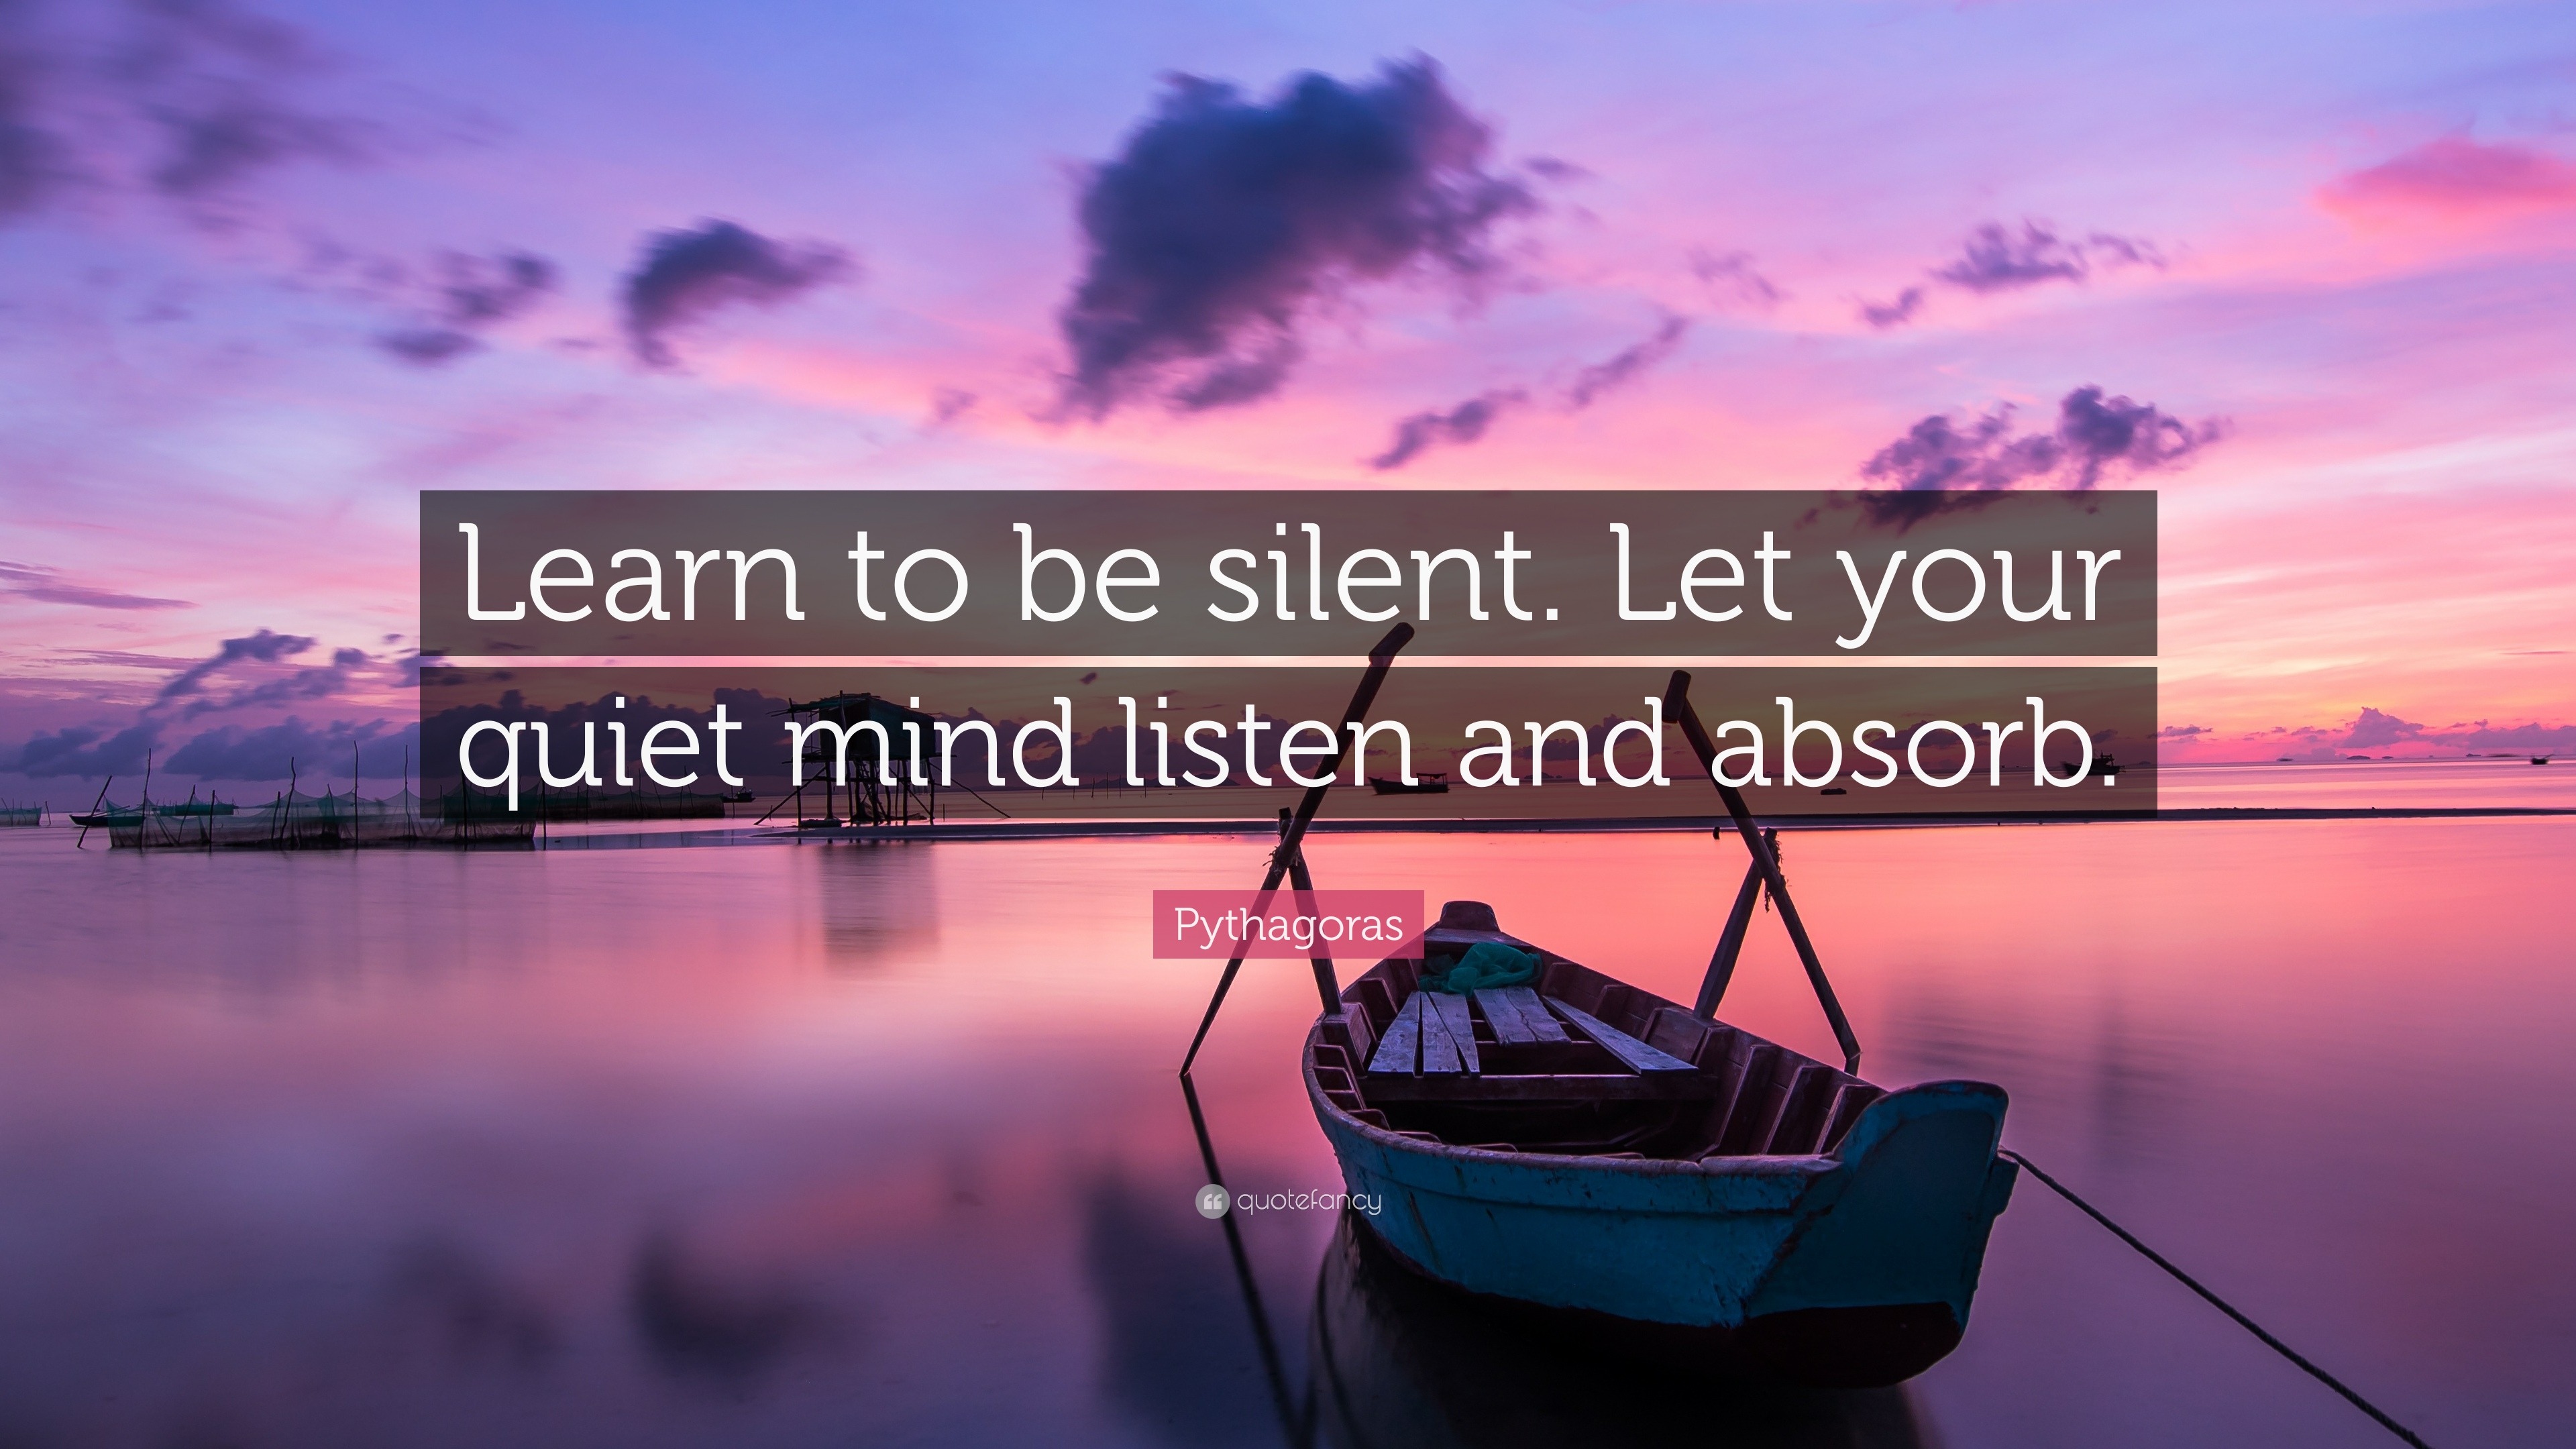 Pythagoras Quote: “Learn to be silent. Let your quiet mind listen and